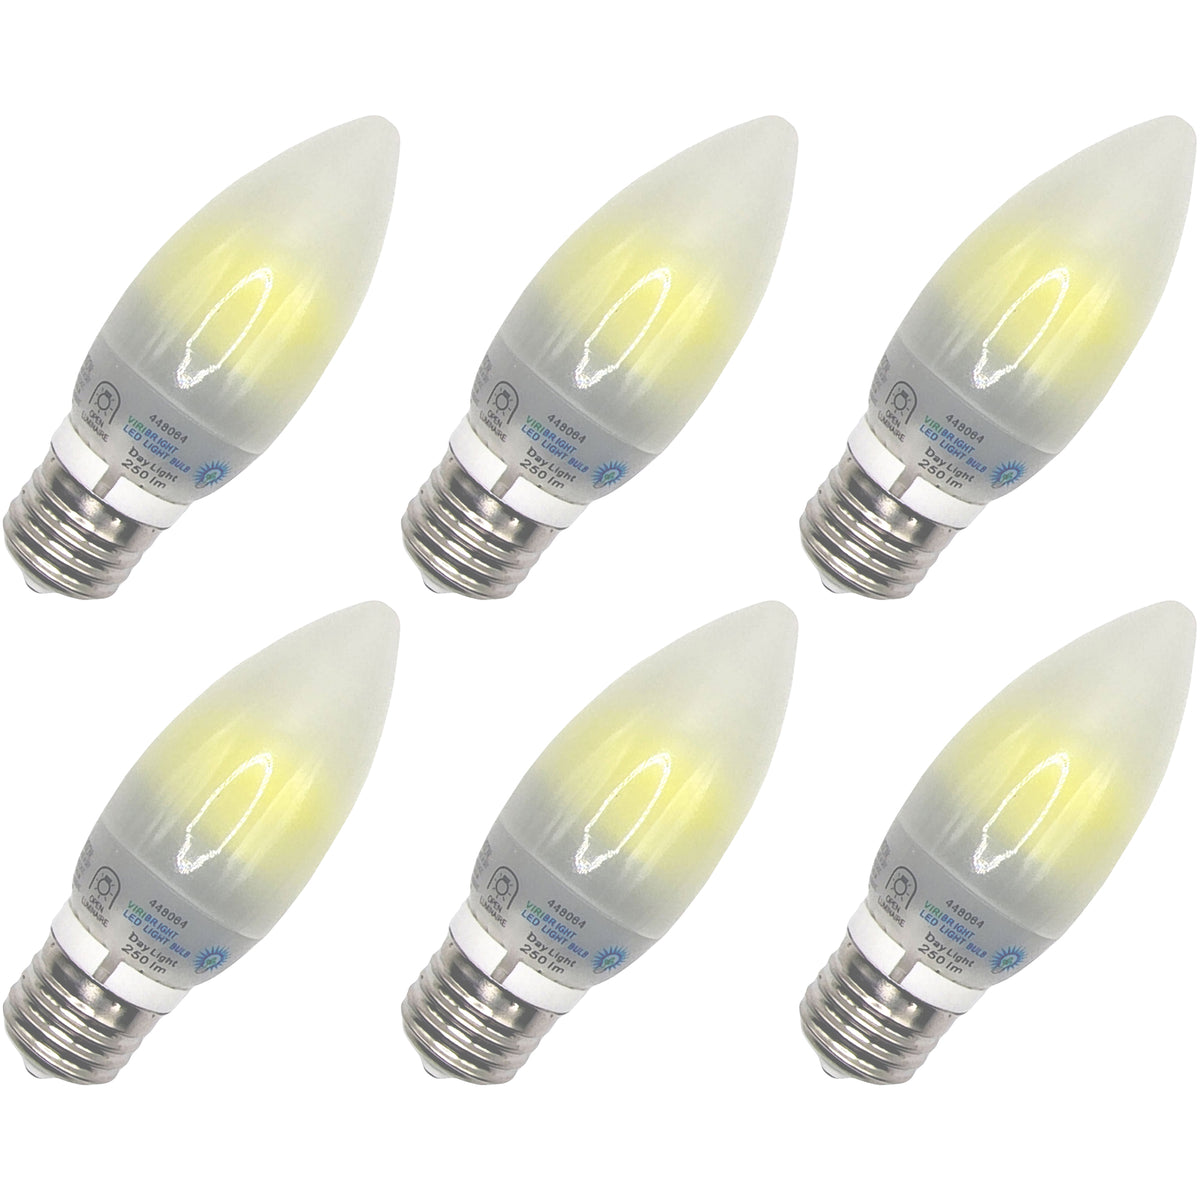 Picture of Viribright 74554-6 3.2W 6000K 25W Equivalent E26 LED Chandelier Daylight Bulb - Pack of 6